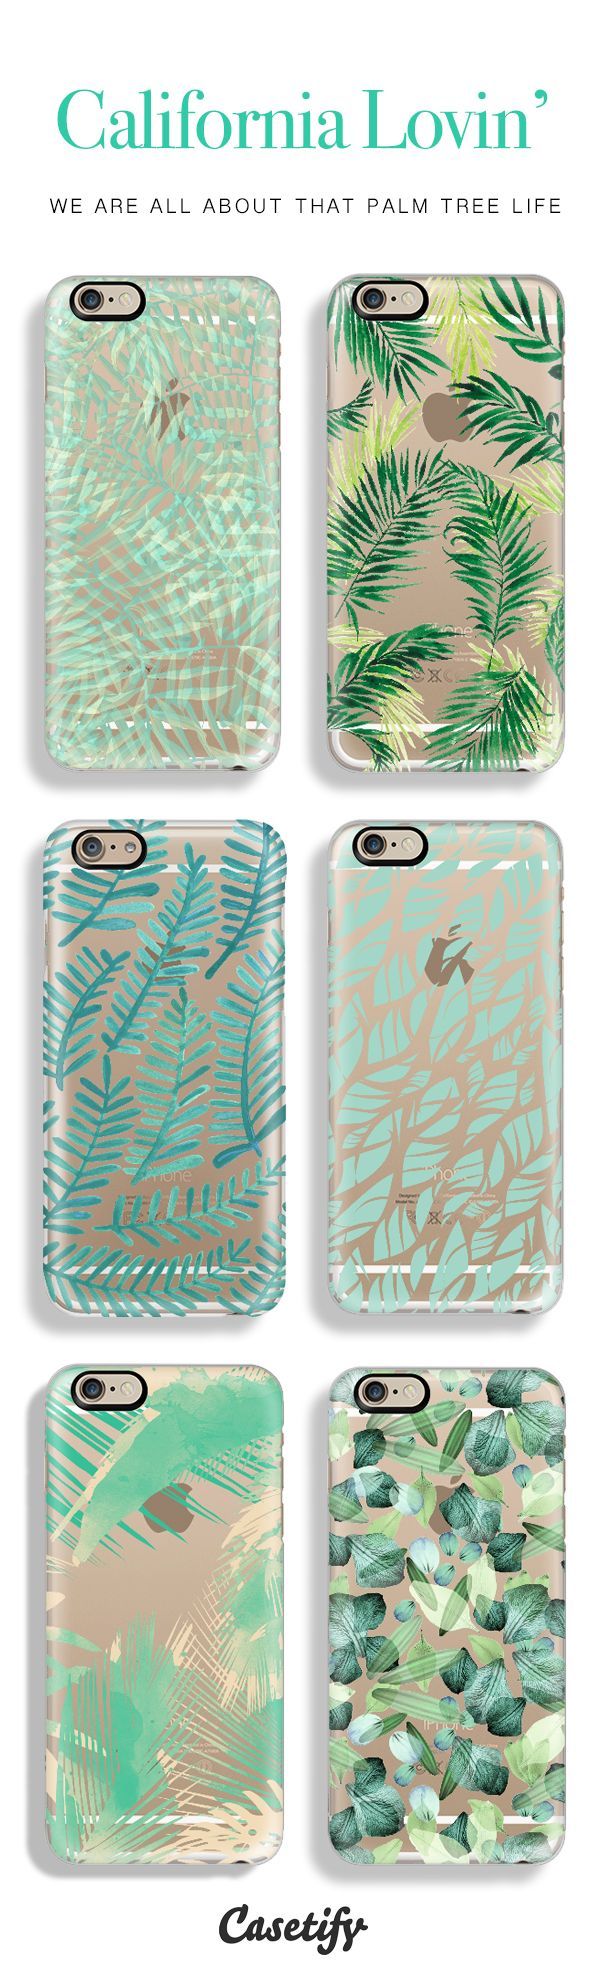 Top 6 palm tree iPhone 6 protective phone cases | Click through to see more iPhone 6 phone case ideas  www.casetify.com/…